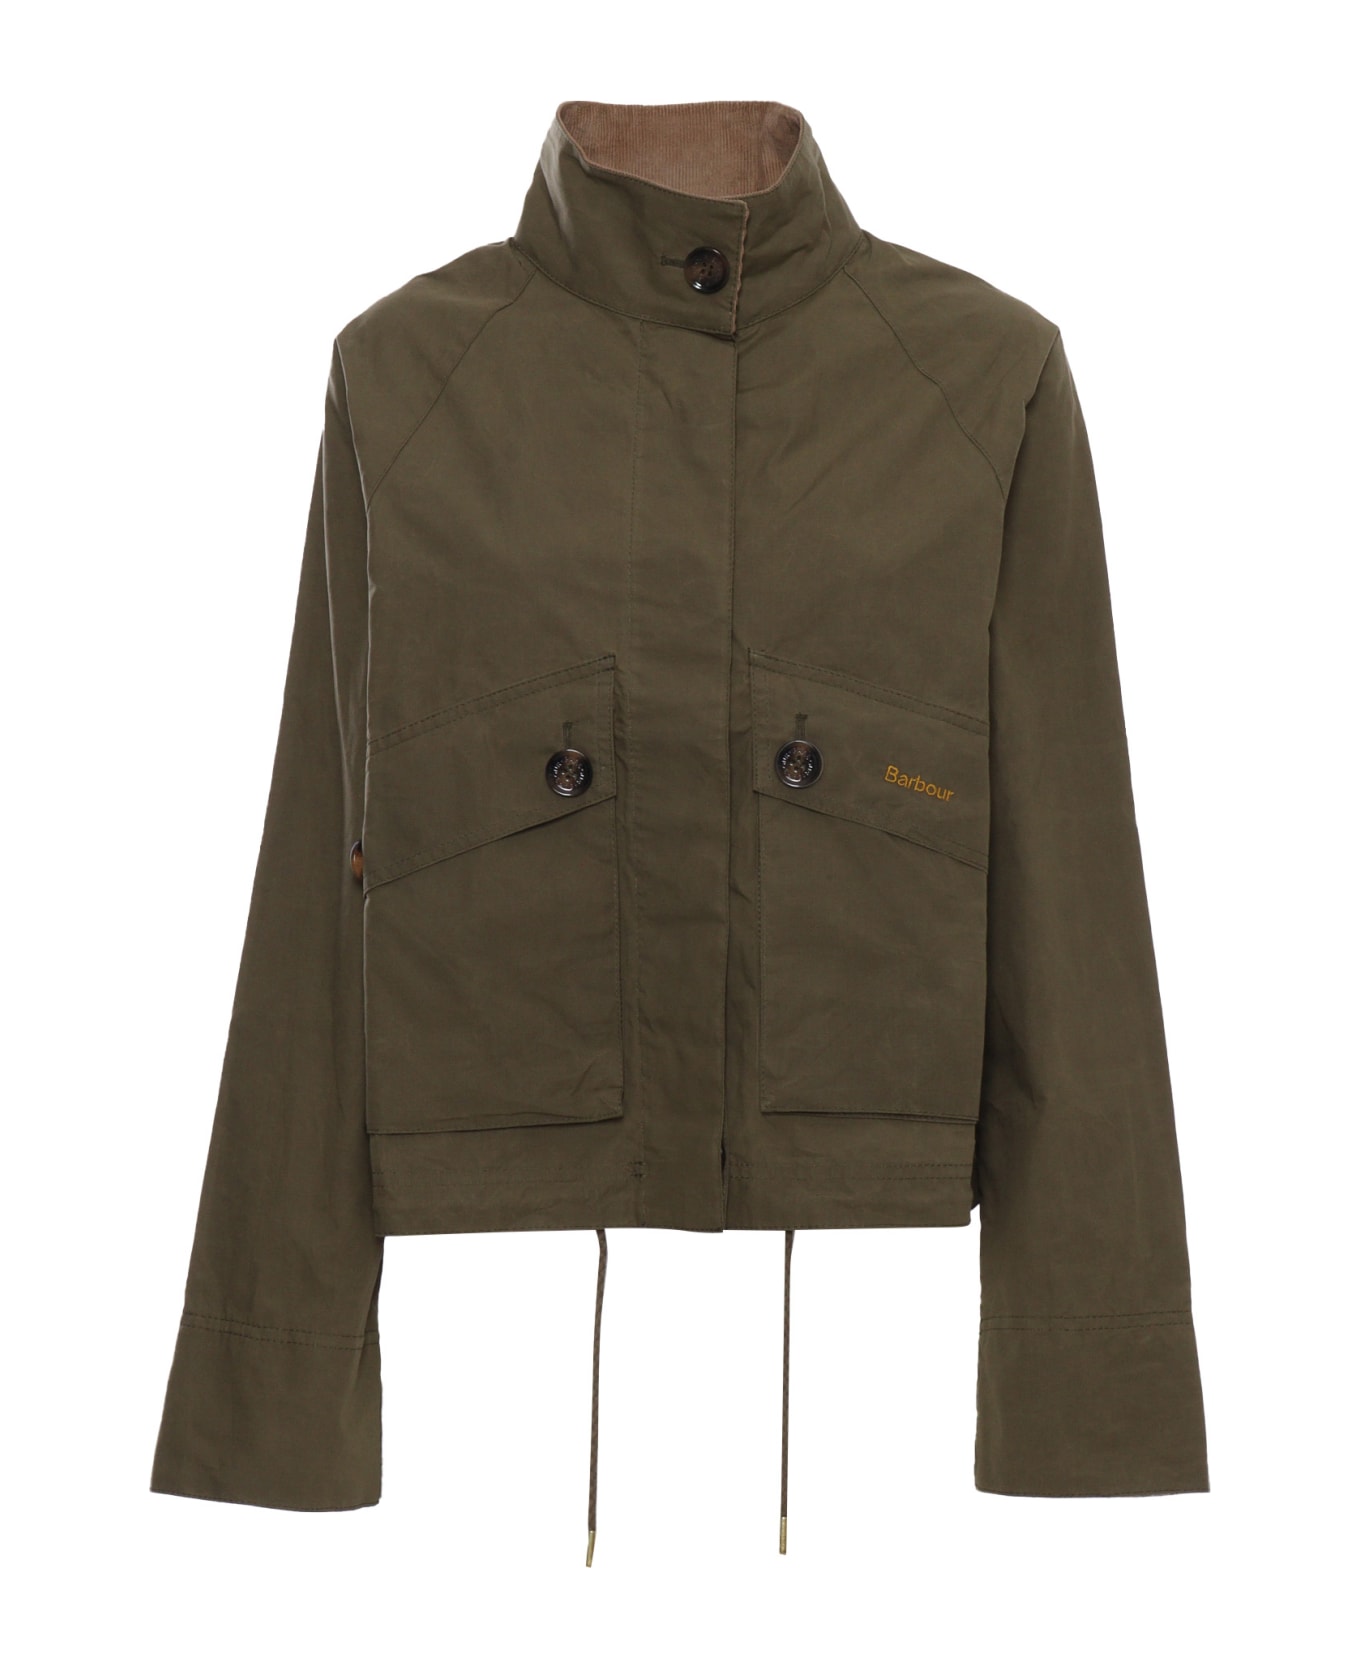 Barbour Military Green Jacket - GREEN ジャケット